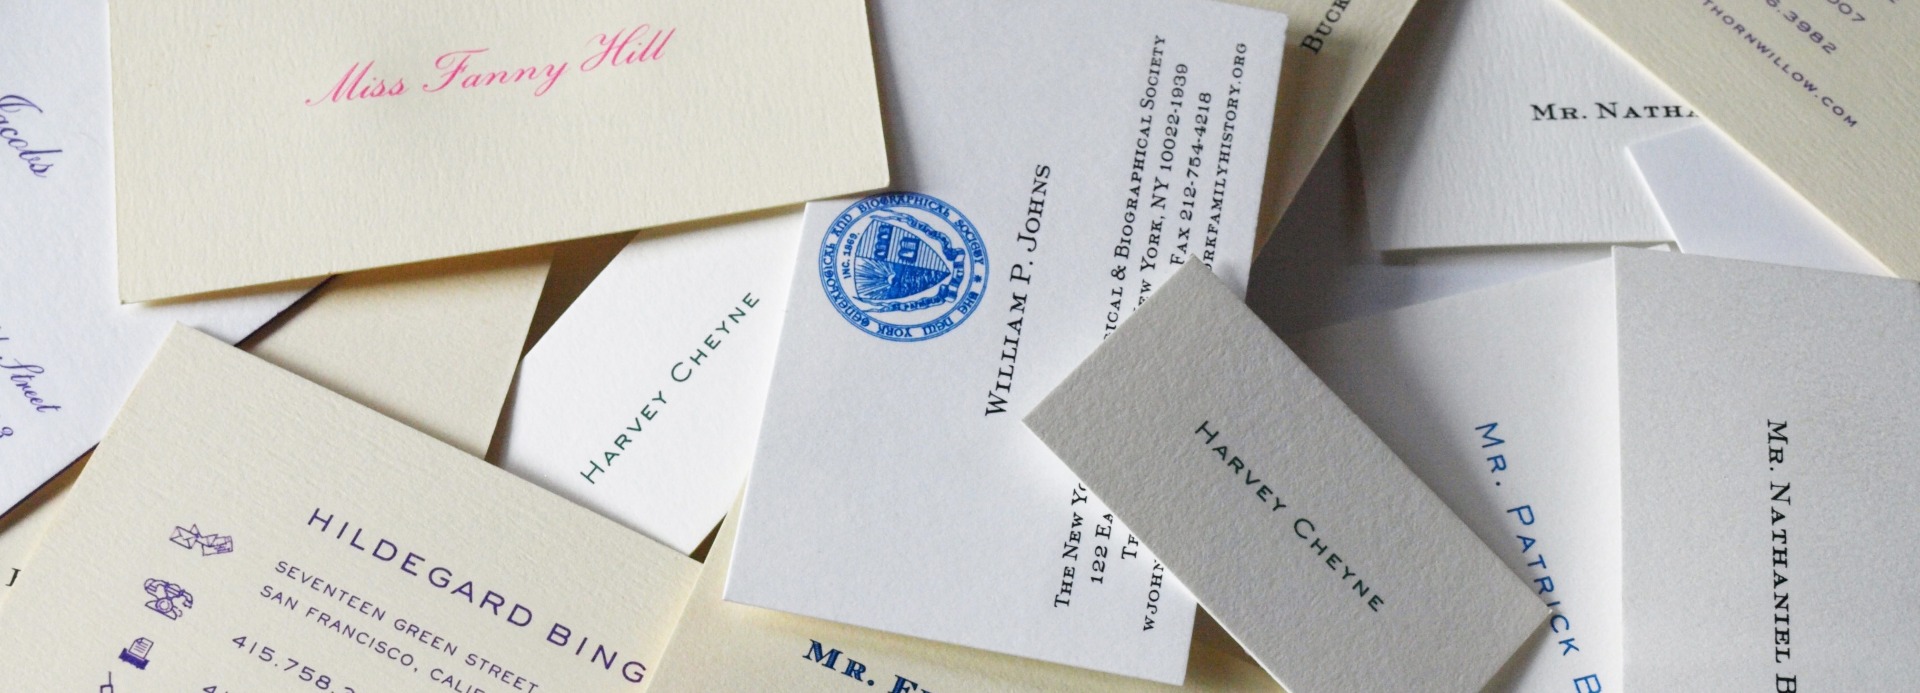 federal business card